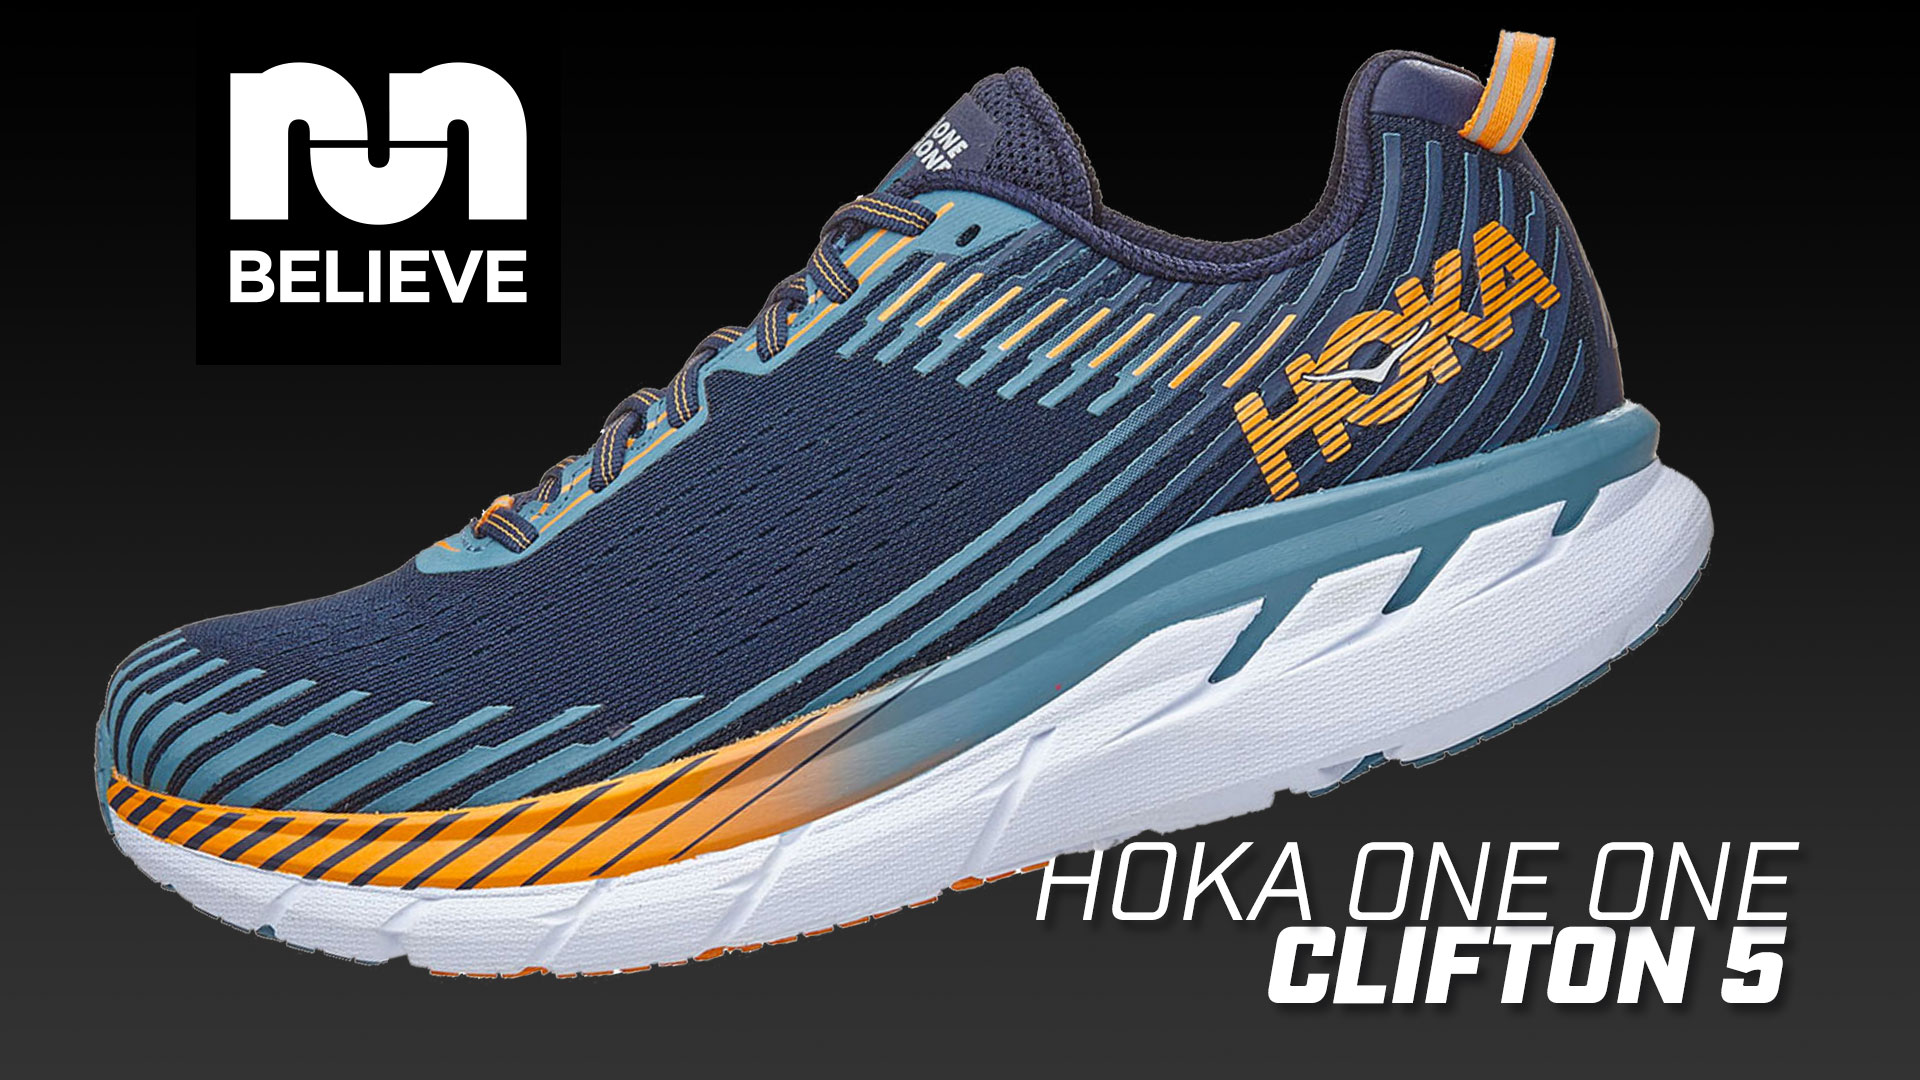 Hoka One One Clifton 5 Video Performance Review - Believe in the Run